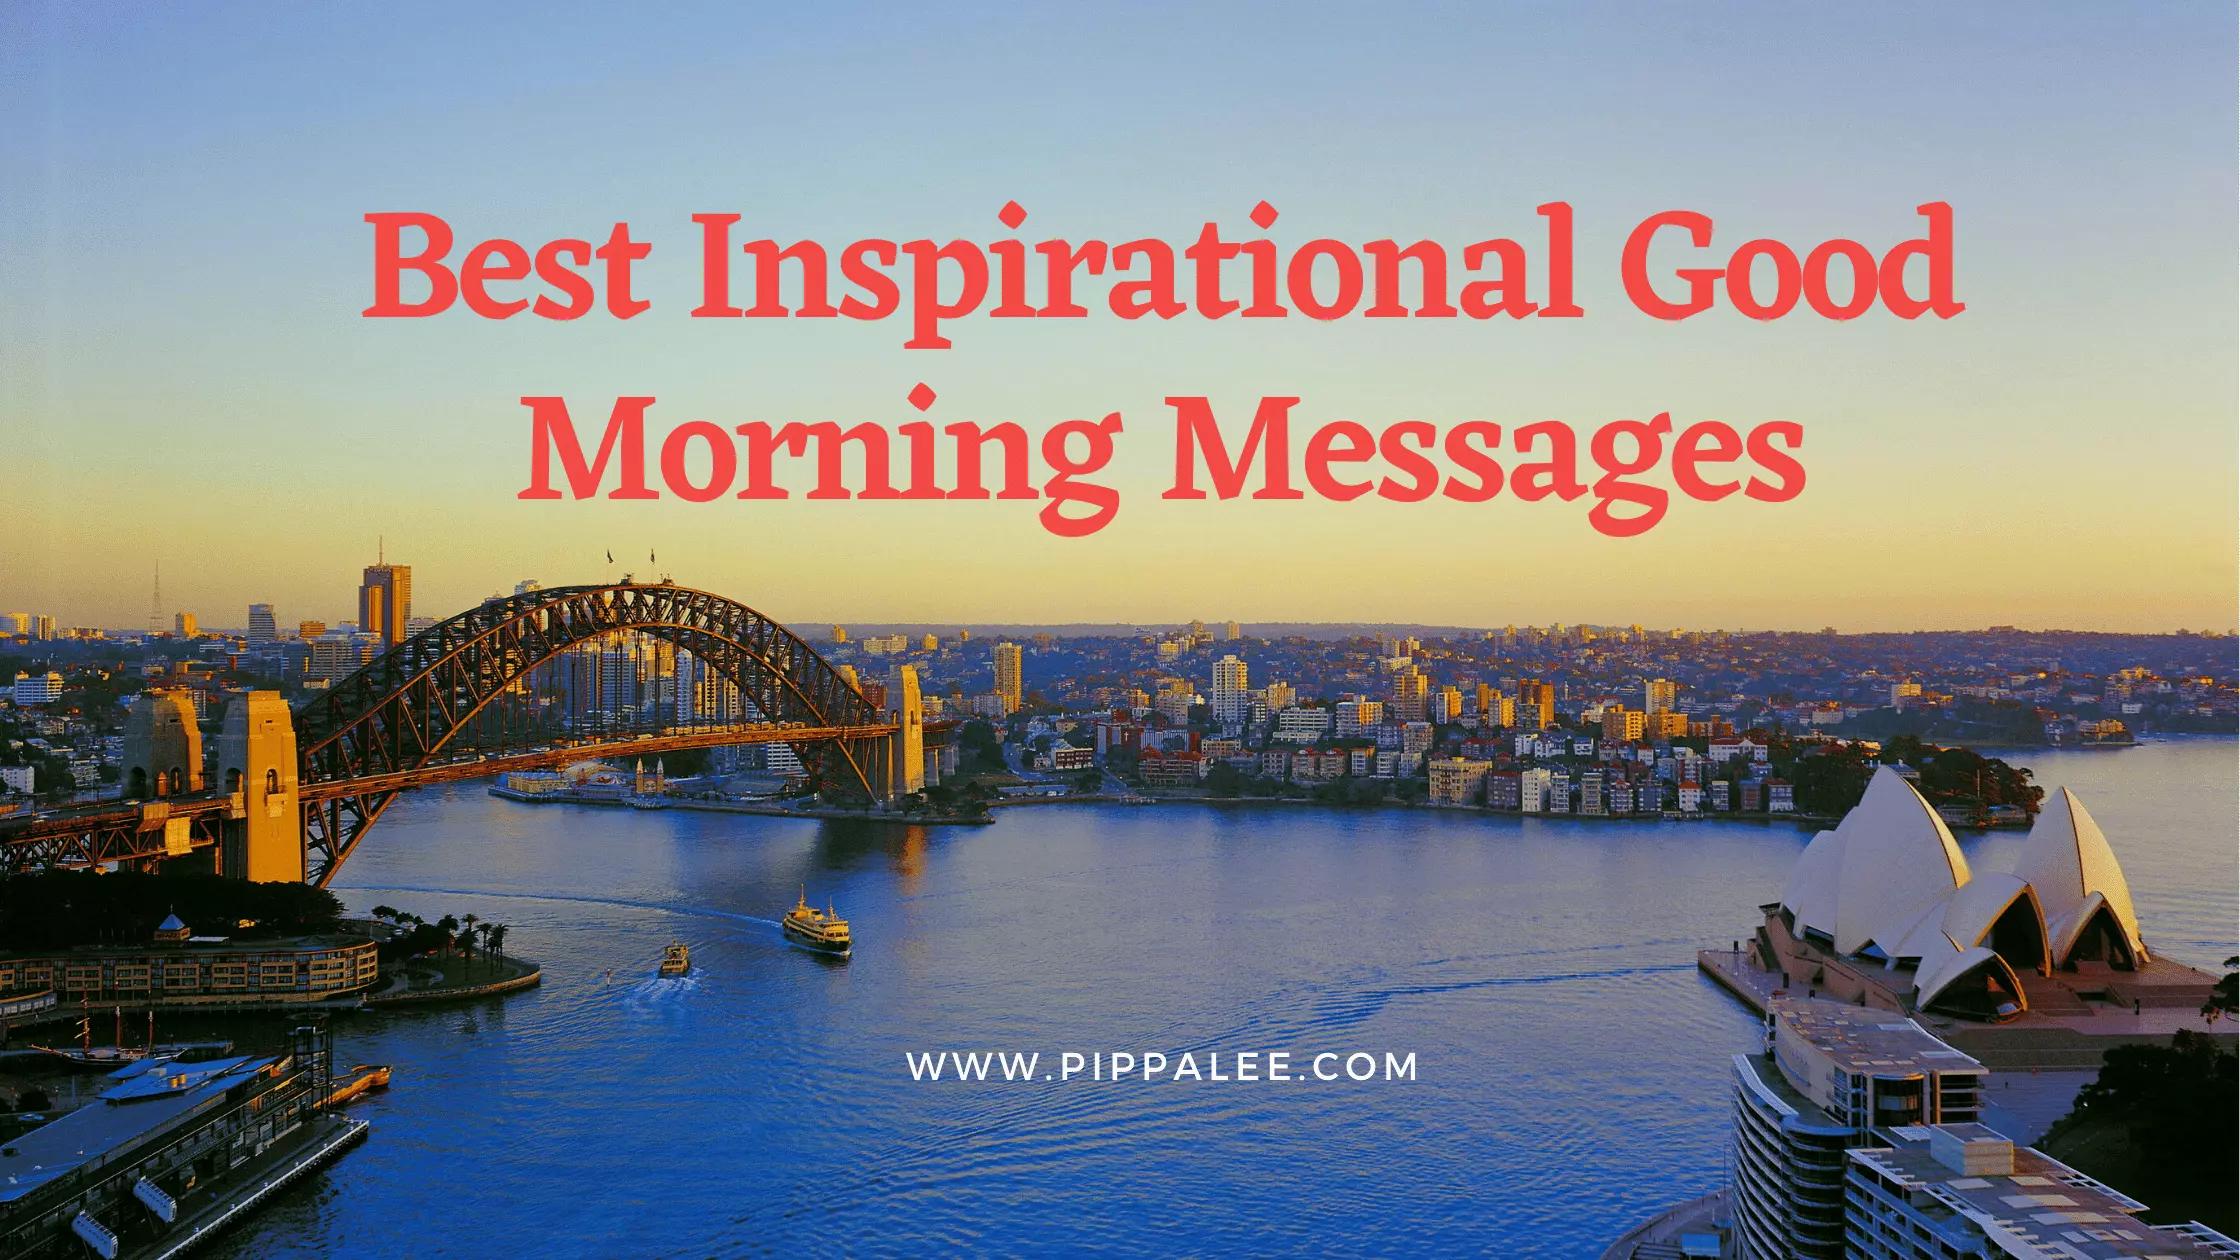 Best Inspirational Good Morning Messages to Wake You Up in the Morning